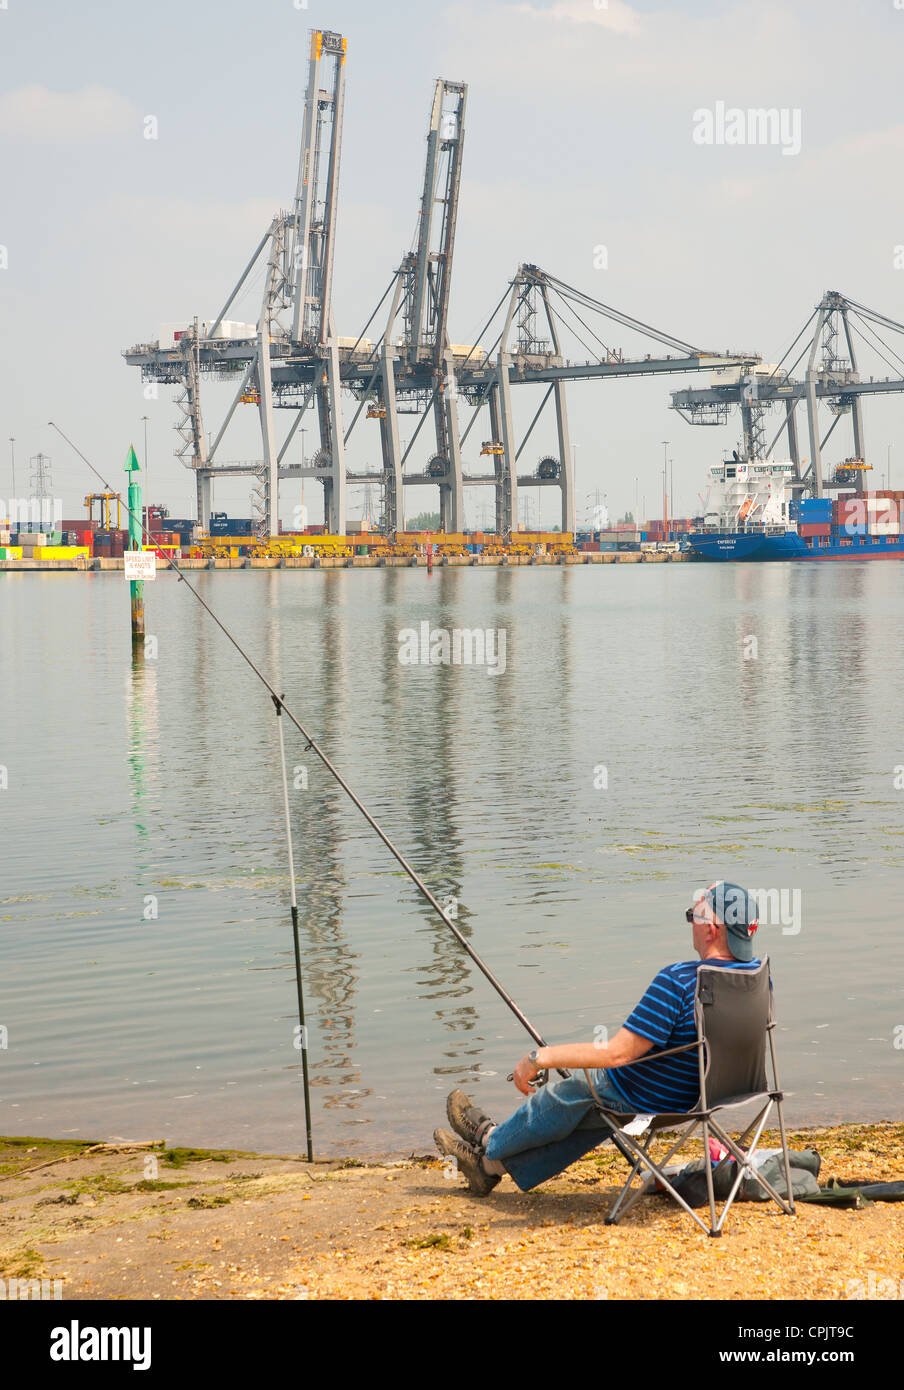 A fisherman relaxes by the harbor. Photographed at Southampton international container port, Hampshire, England,  in May 2012. Stock Photo